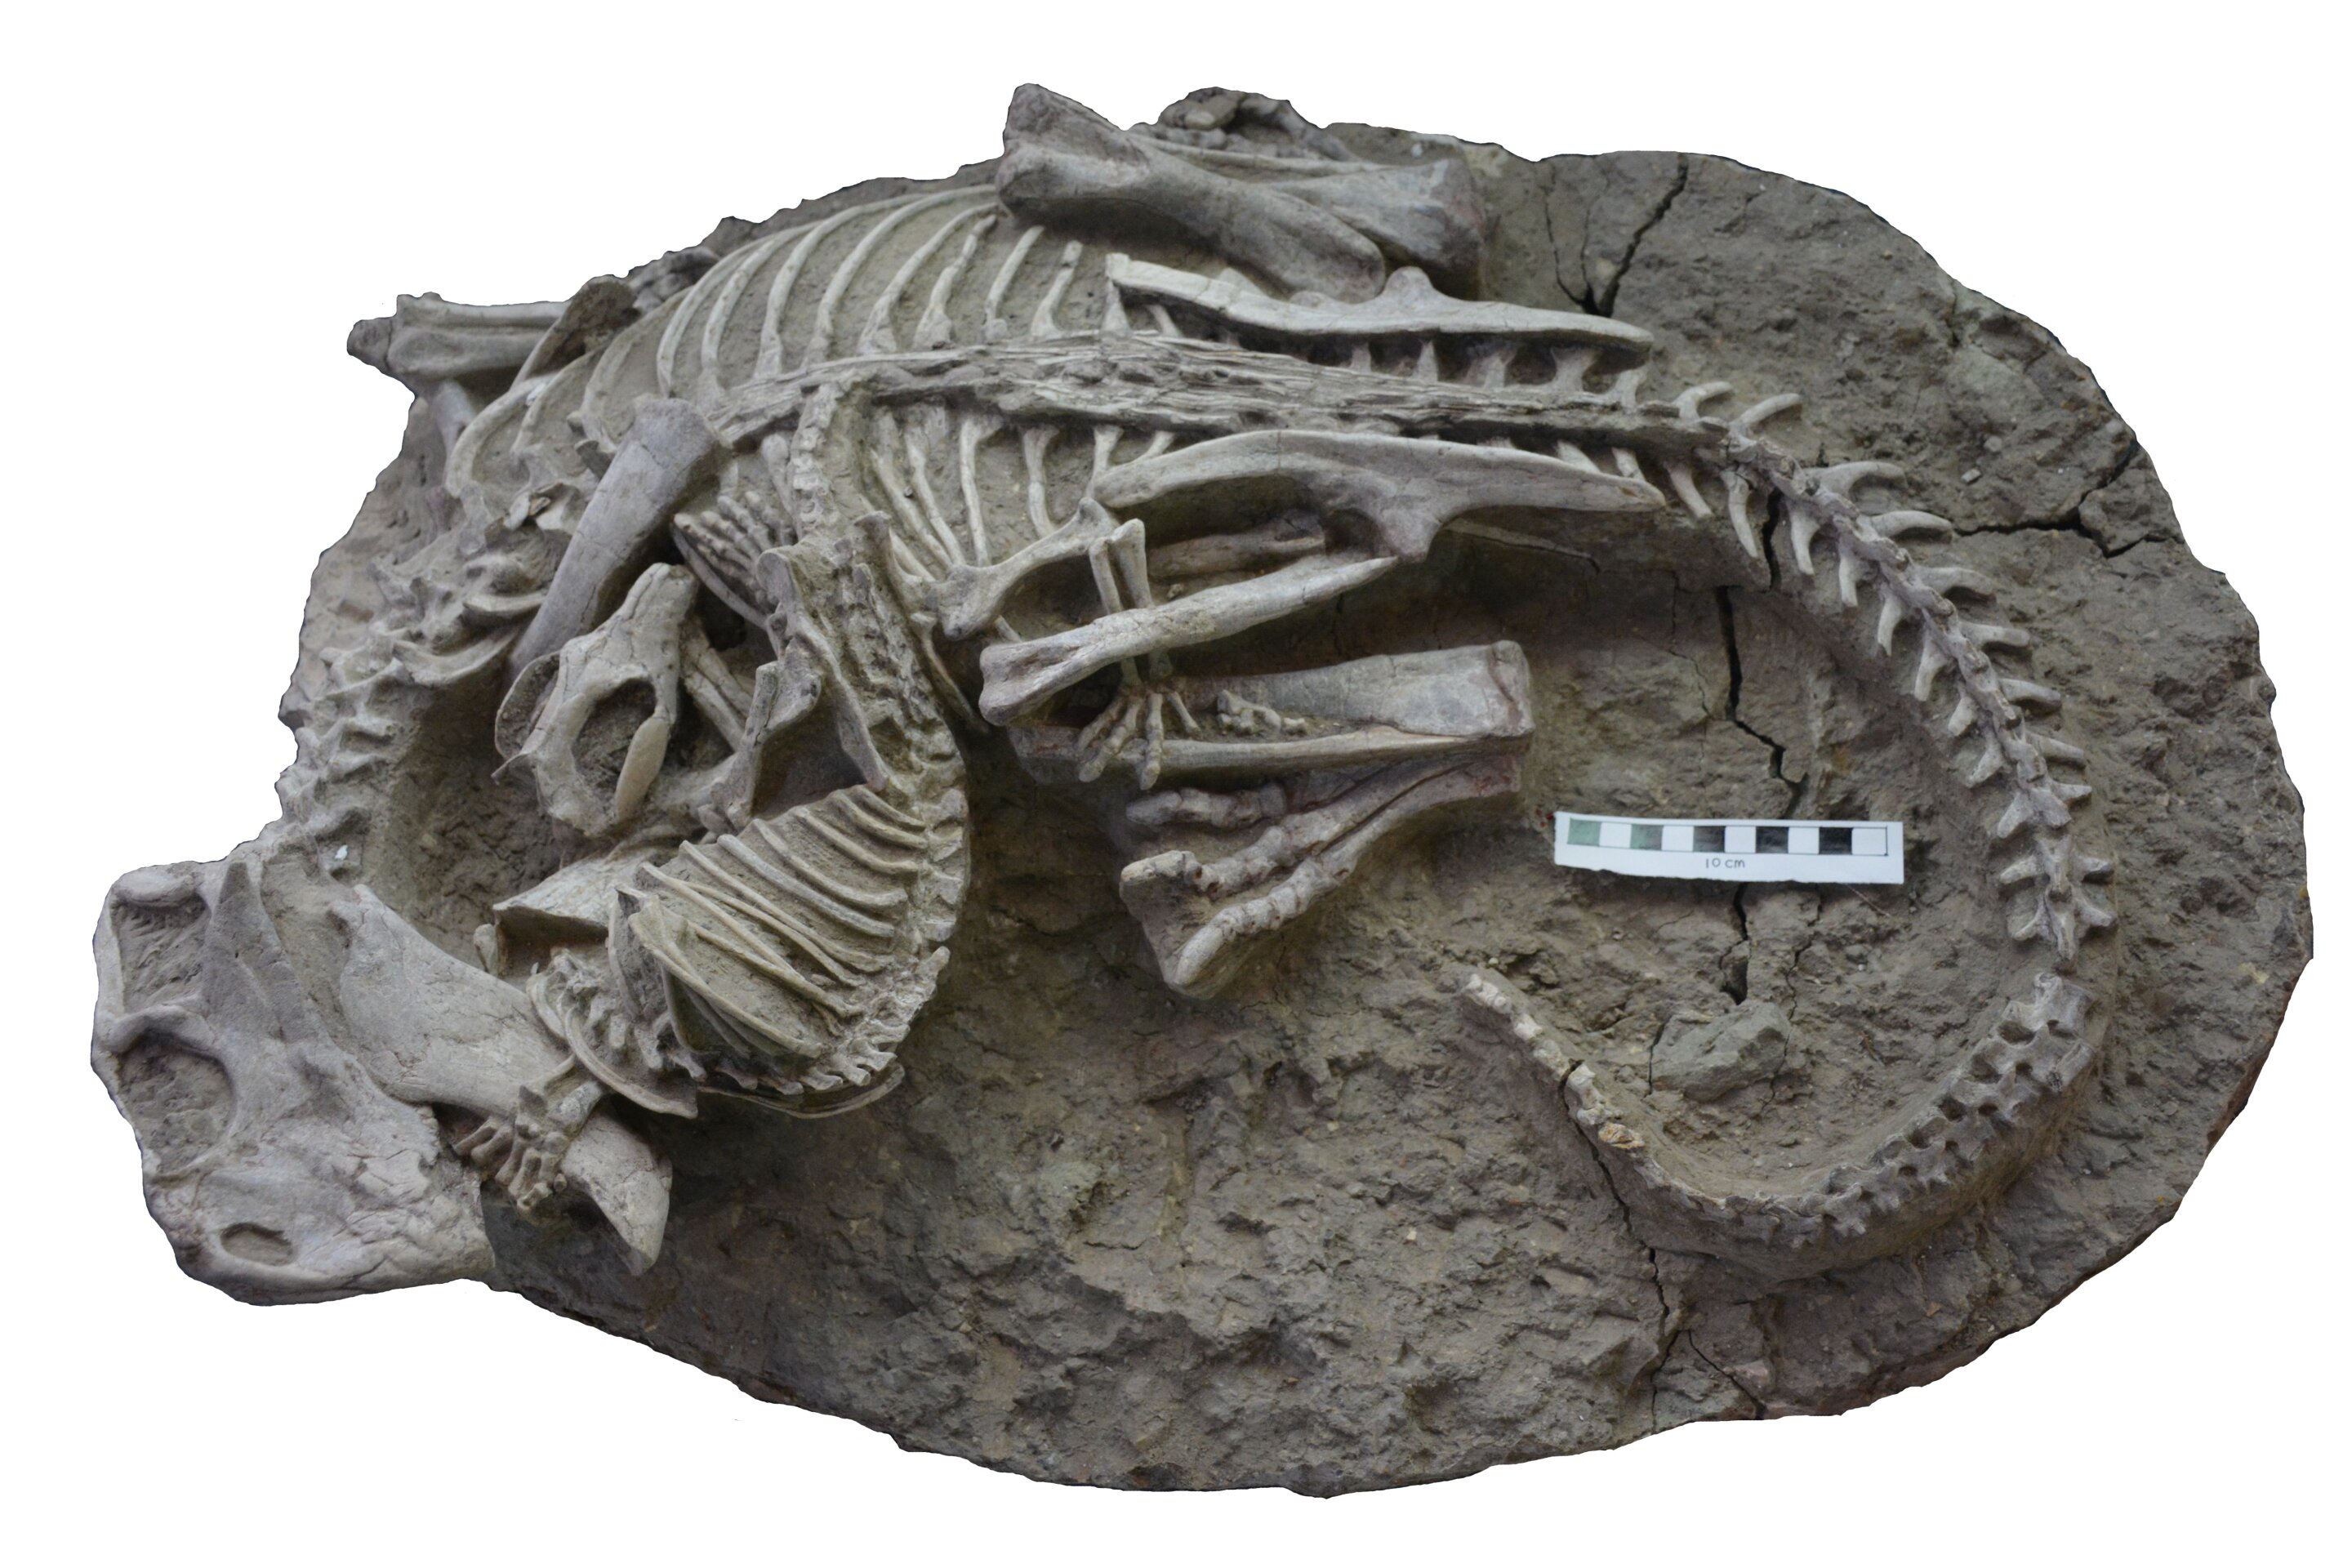 Unusual fossil shows rare evidence of a mammal attacking a dinosaur